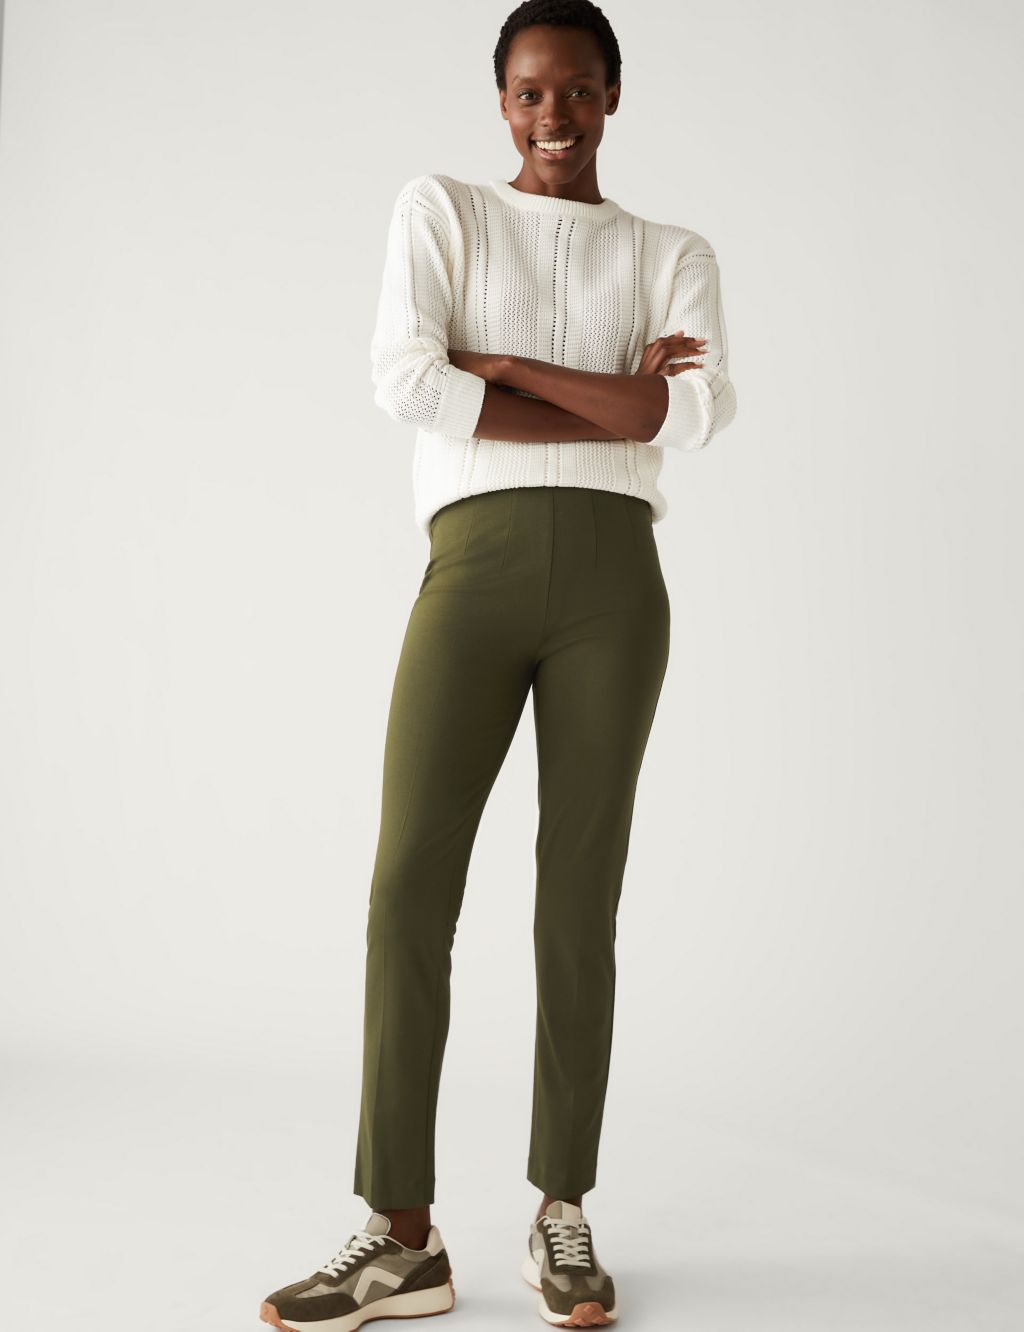 Jersey Slim Fit Ankle Grazer Trousers  image 2